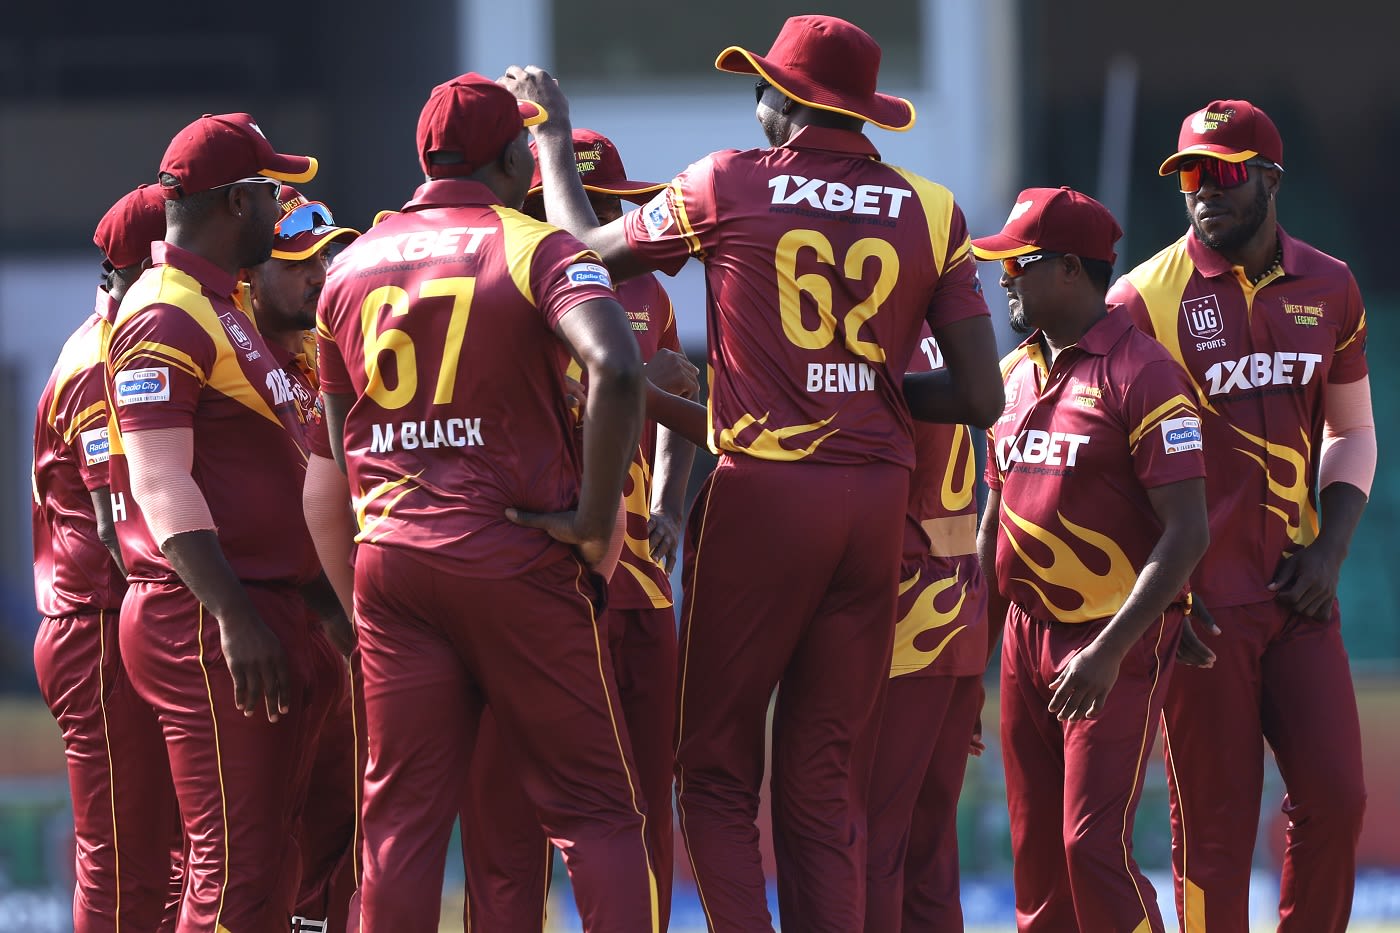 The West Indies players get together to celebrate a wicket